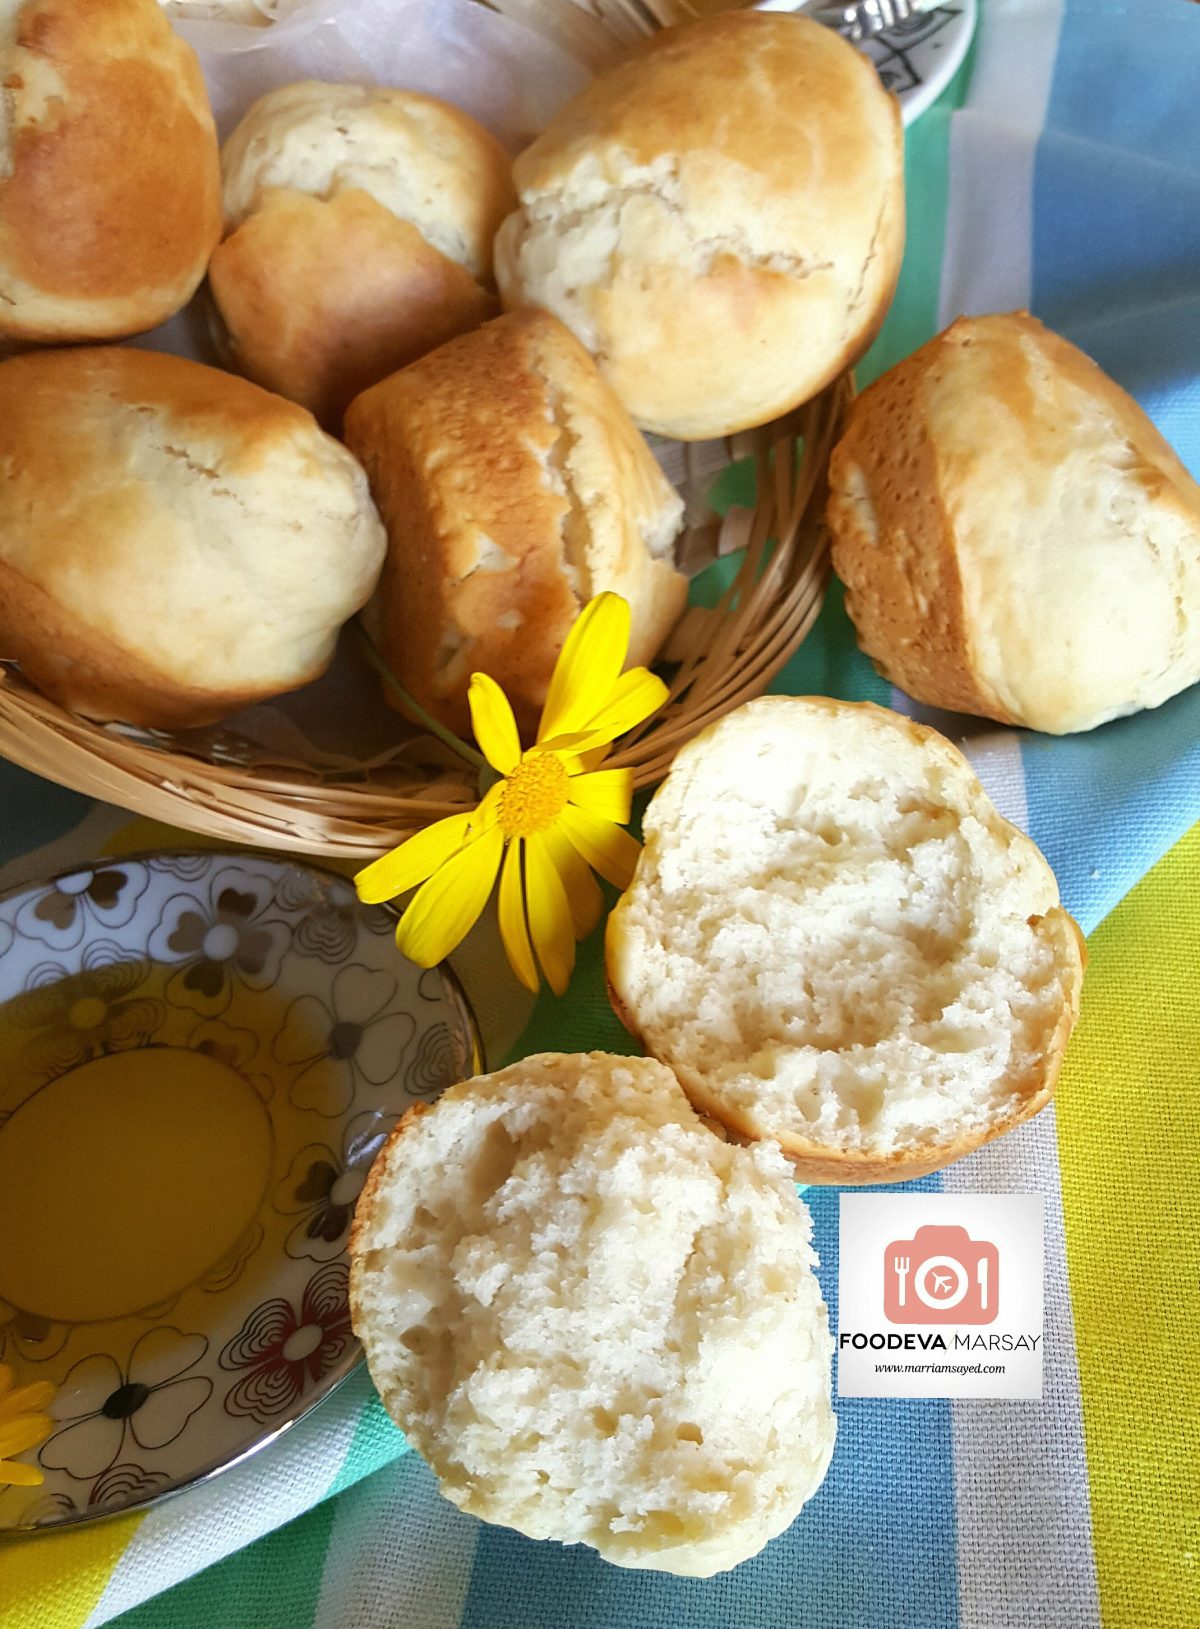 Easy 'No Yeast' Dinner Rolls are ready to be enjoyed.